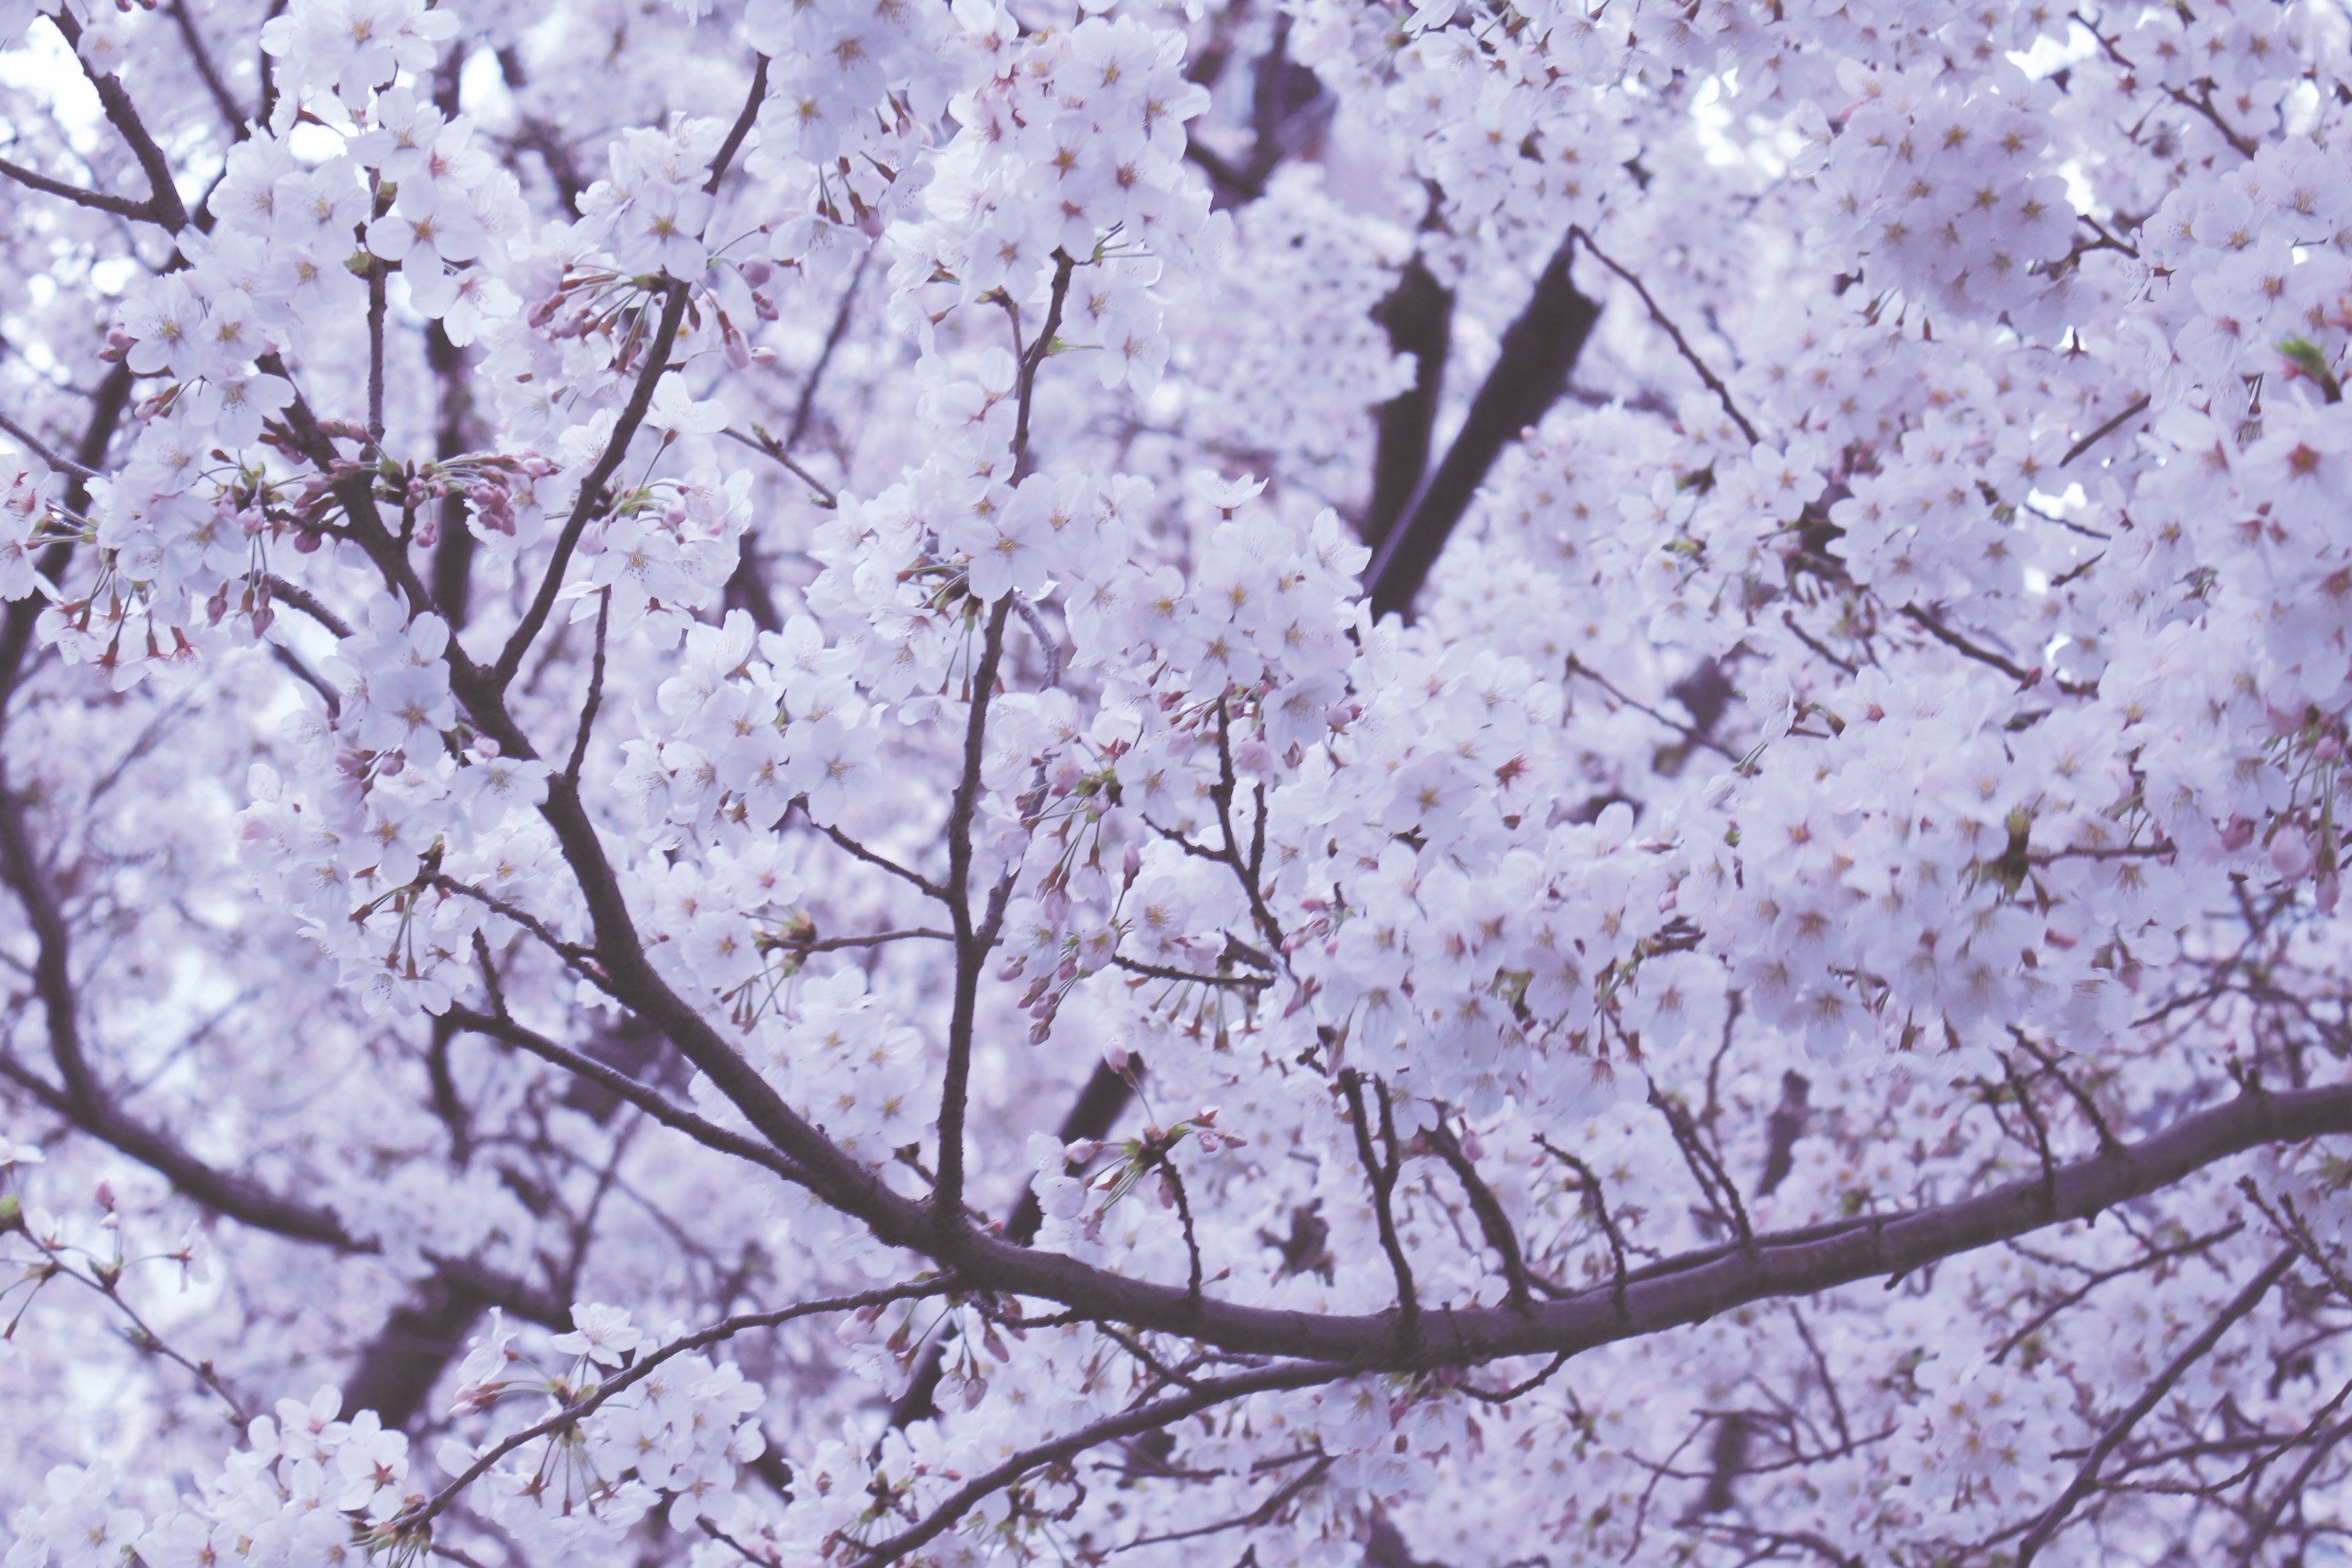 A tree with many white flowers on it - Cherry blossom